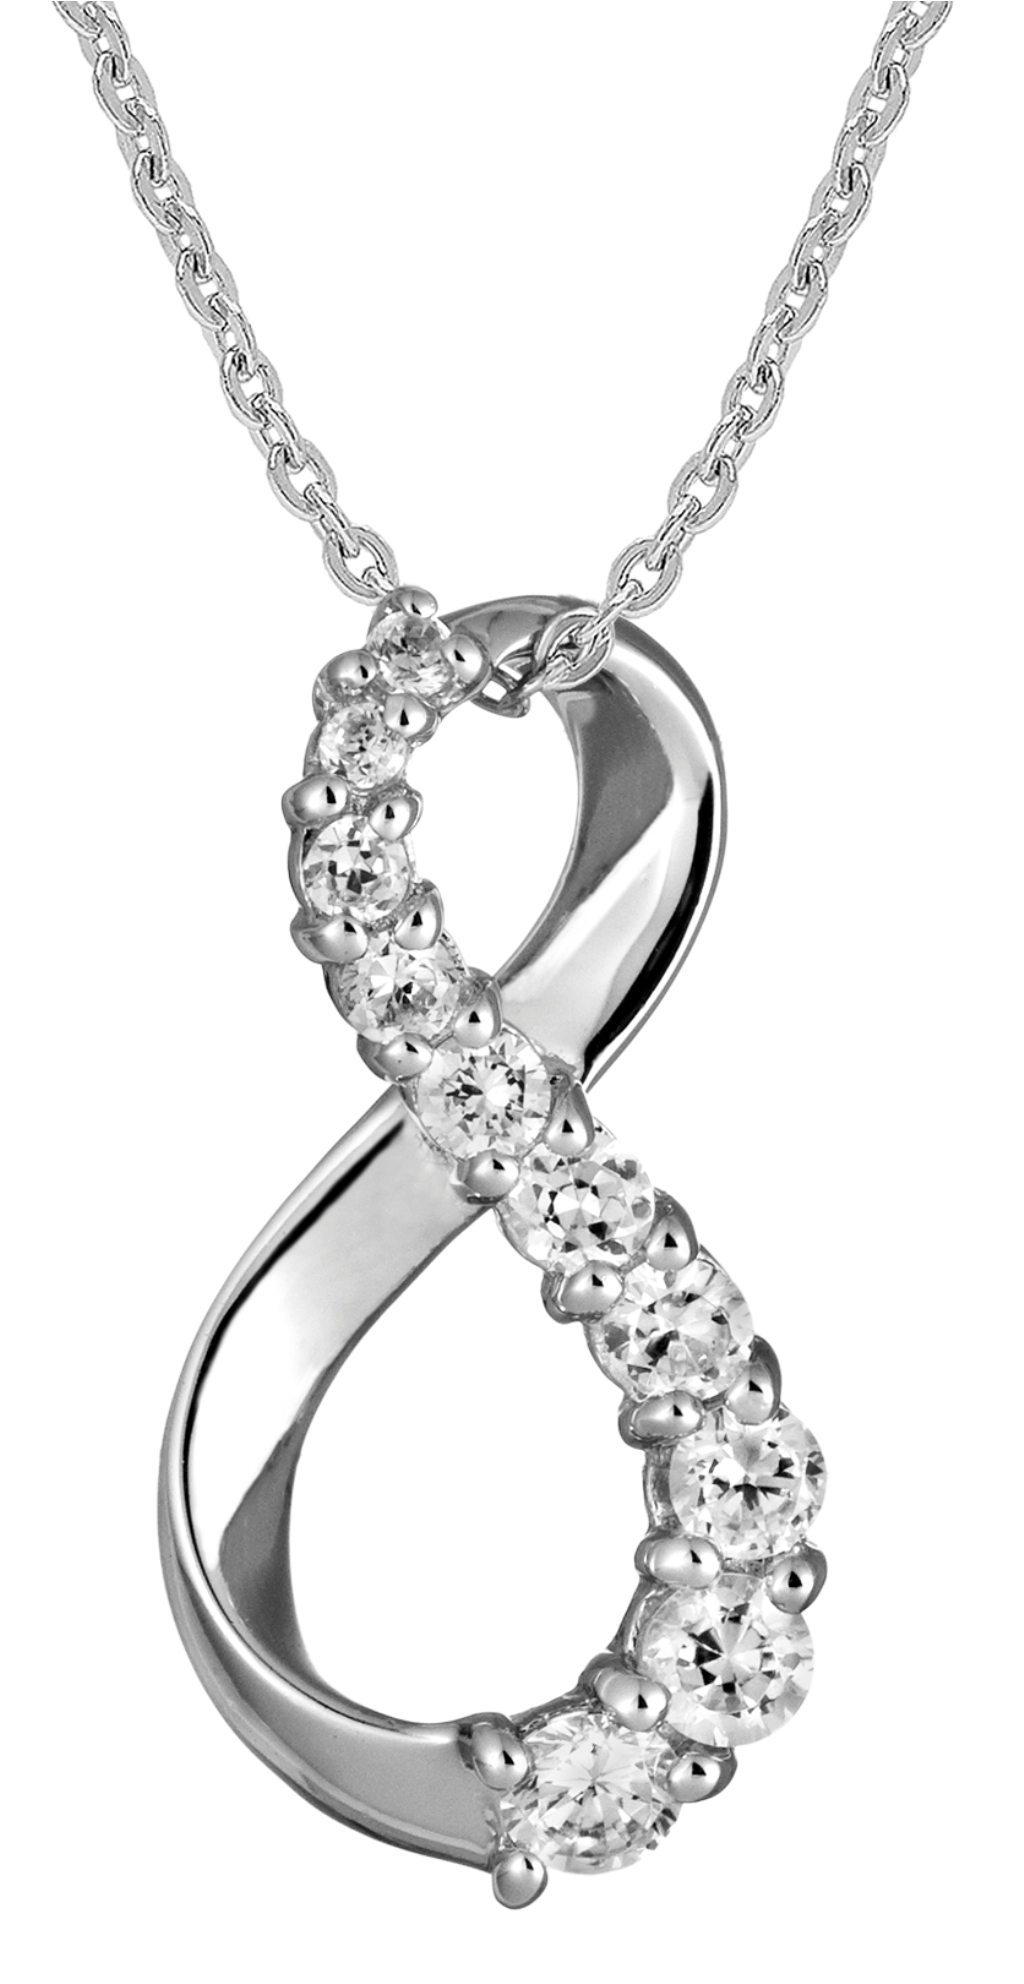  Graduated CZ Infinity Pendant Necklace, Rhodium Plated Sterling Silver, 18, img title=